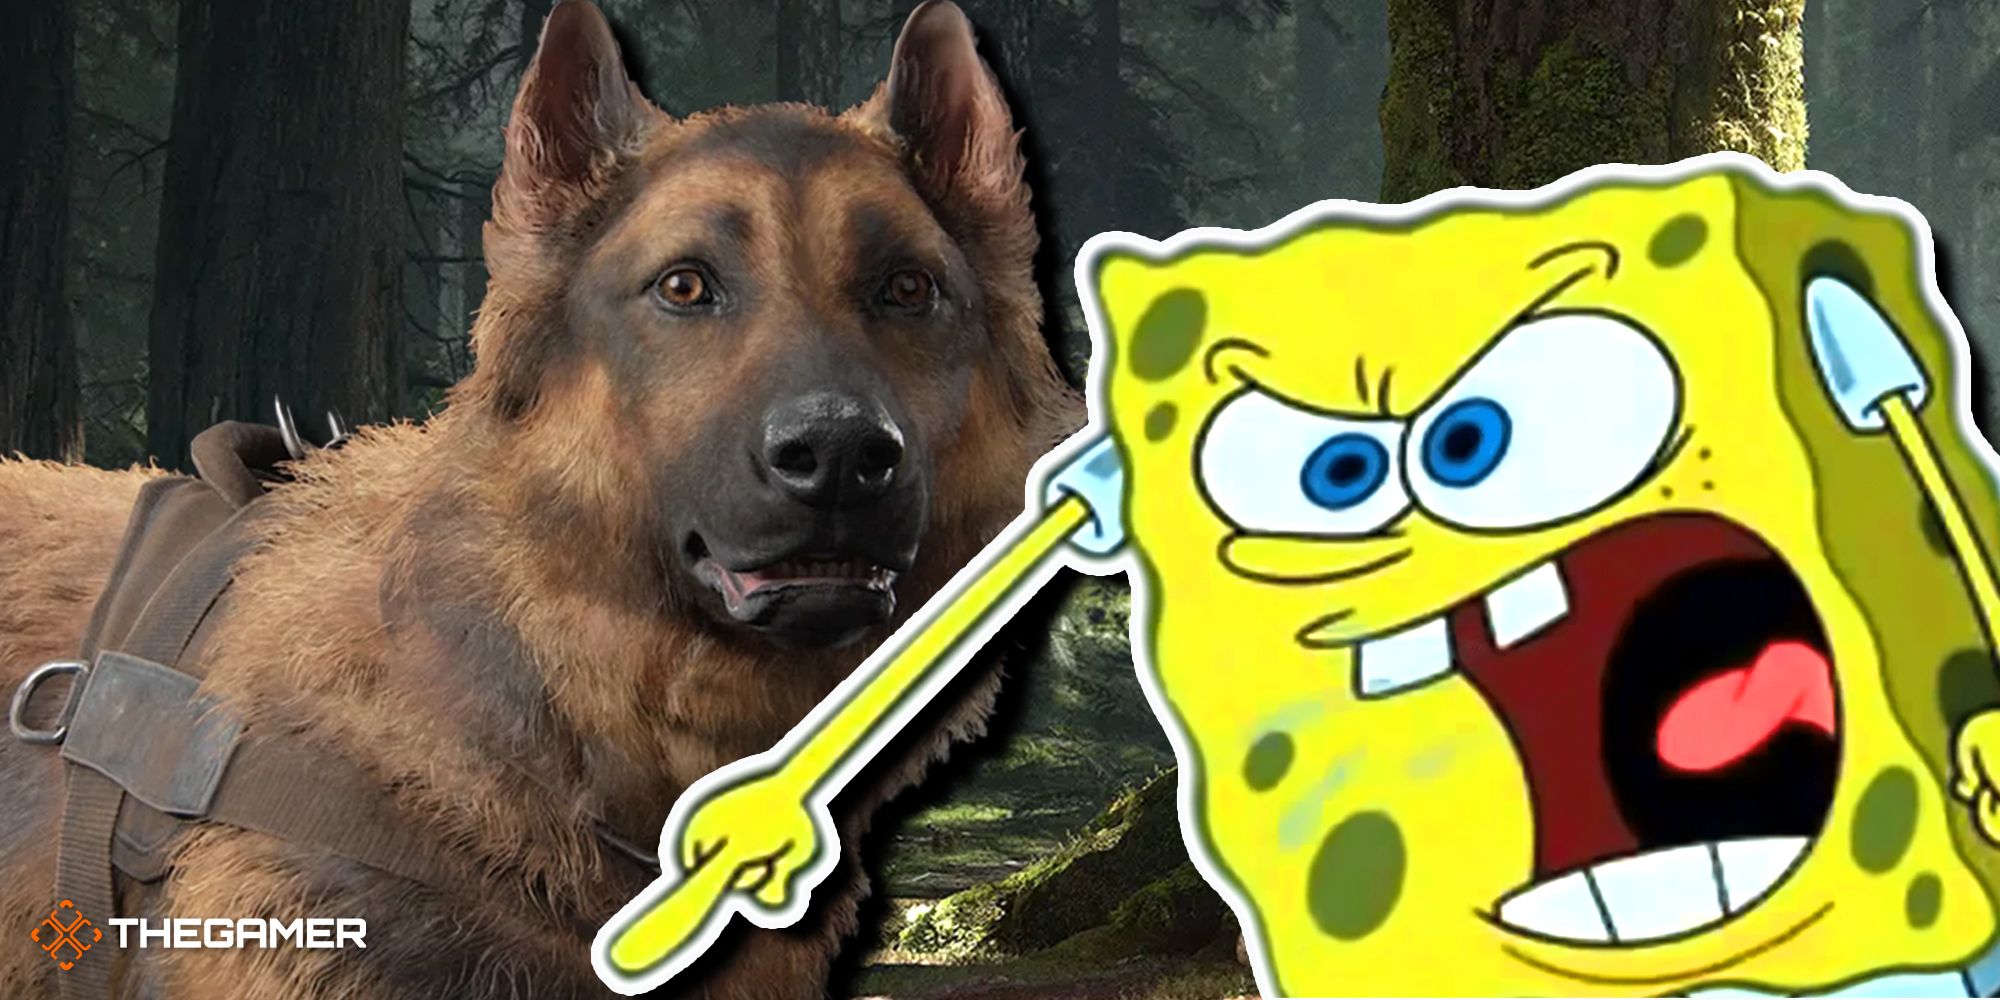 Angry Spongebob pointing at the dogs in The Last of Us